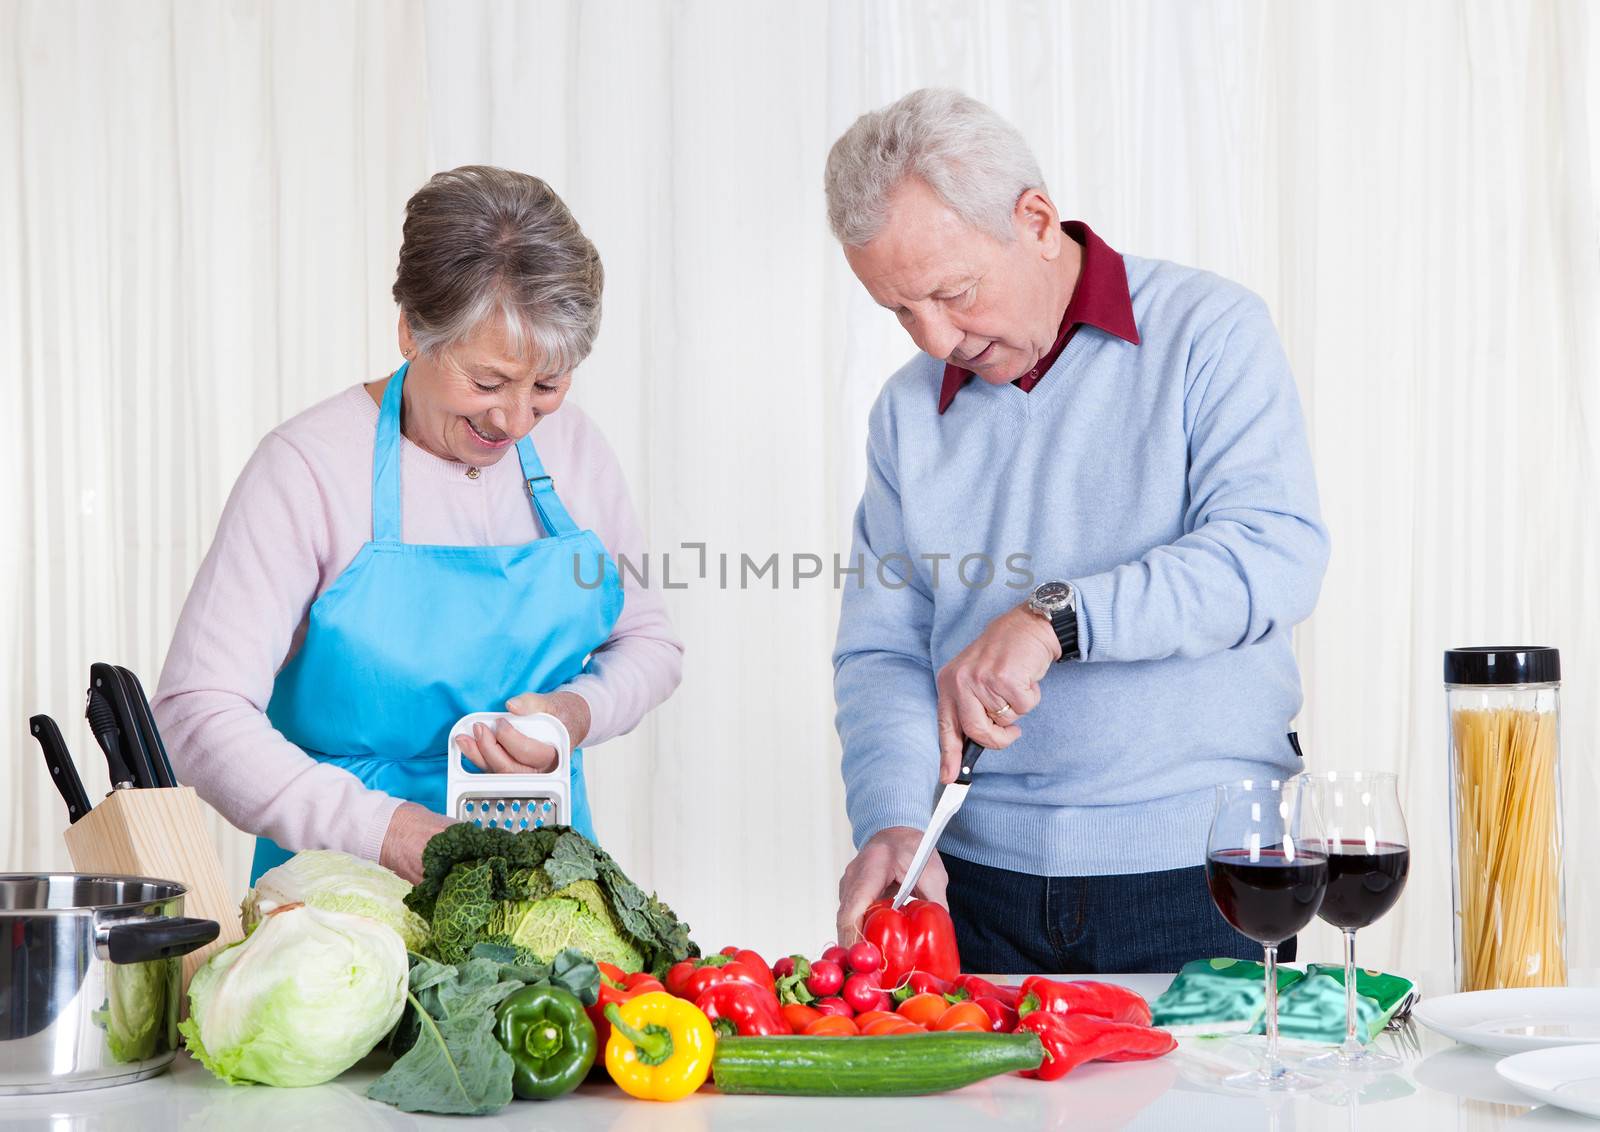 Senior Couple Cutting Vegetables by AndreyPopov